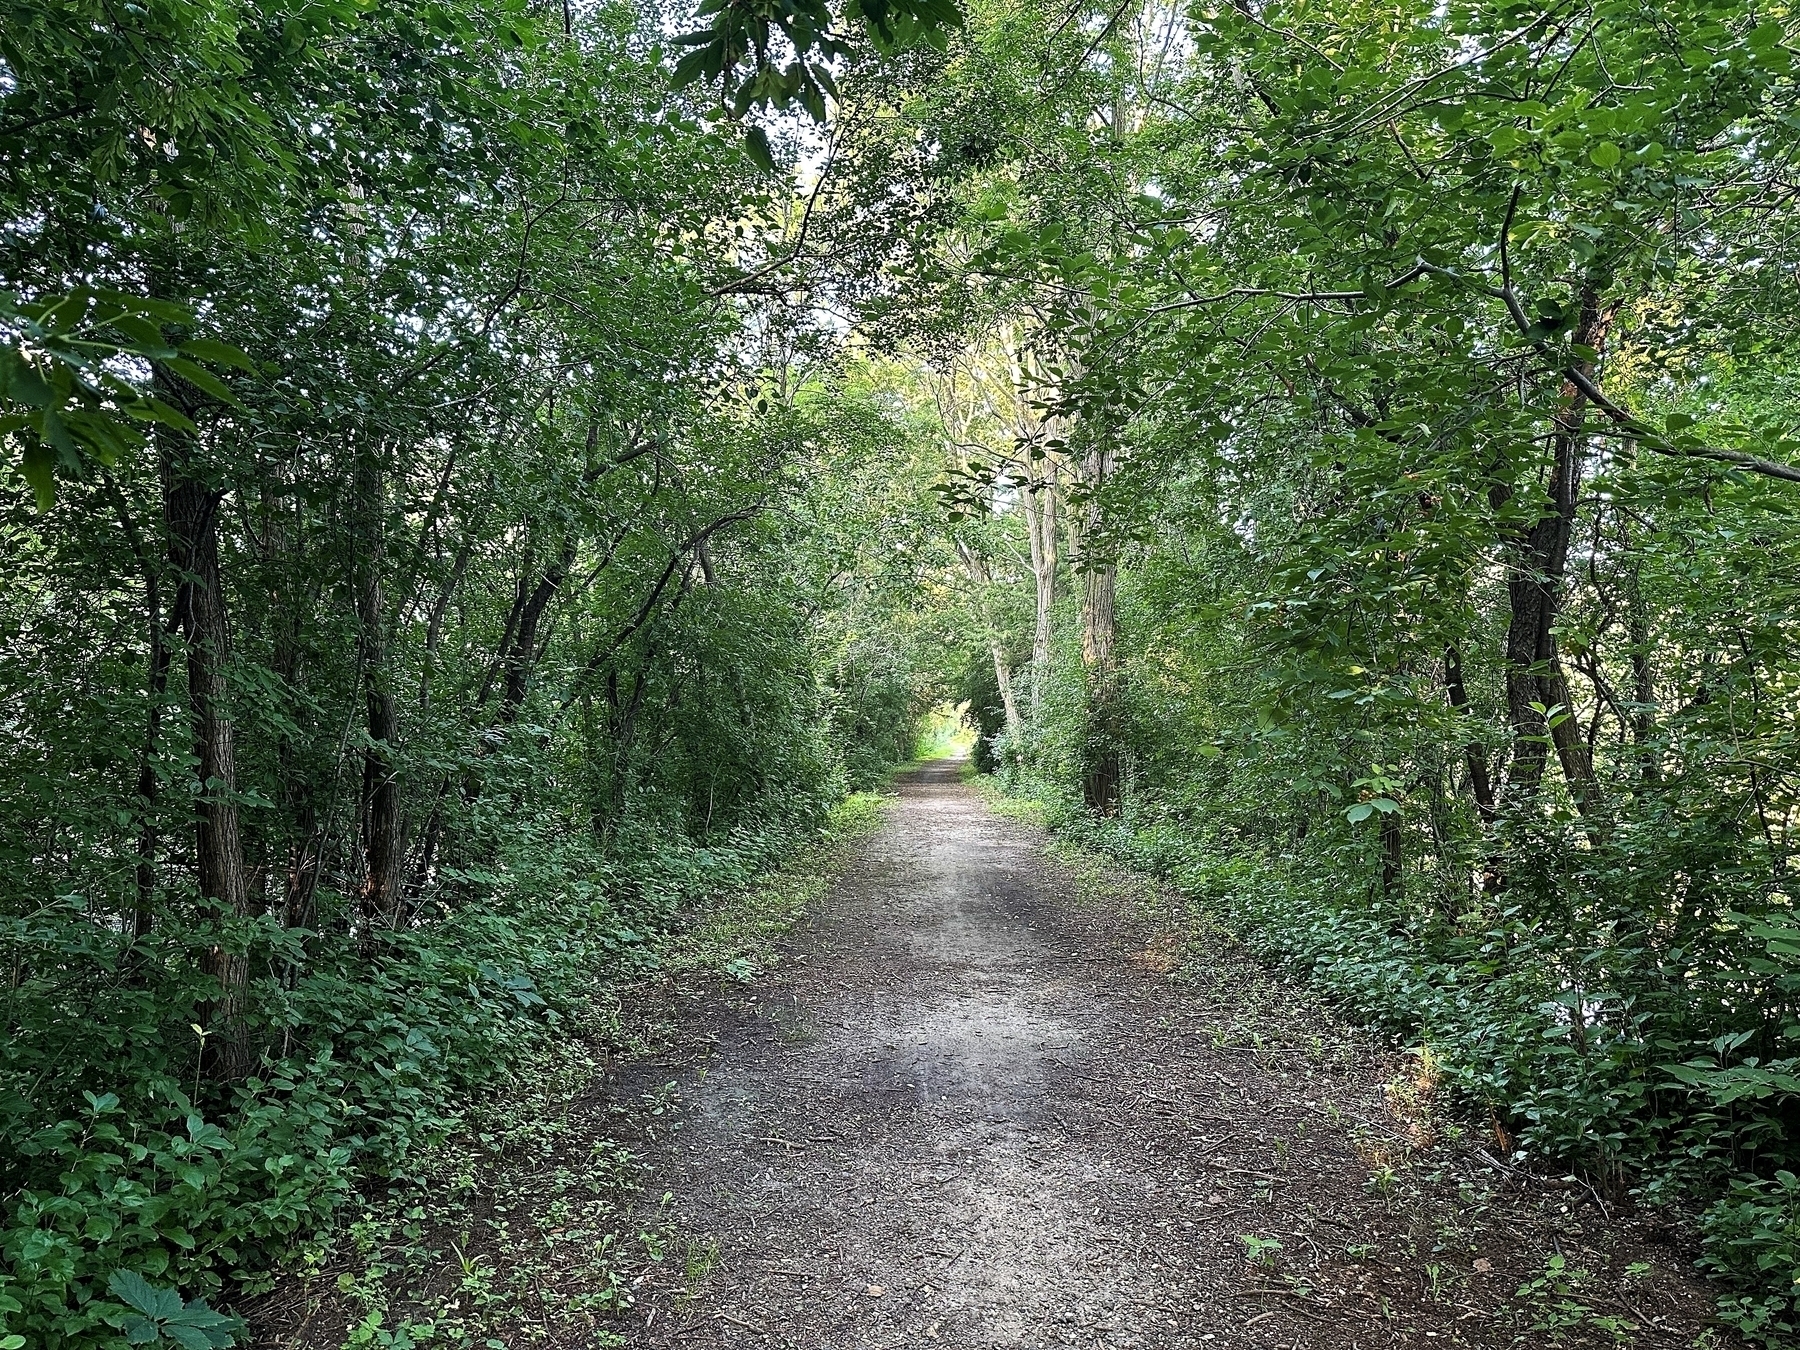 A dirt path stretches forward with overhanging green trees and dense foliage on both sides suggesting a serene wooded area.